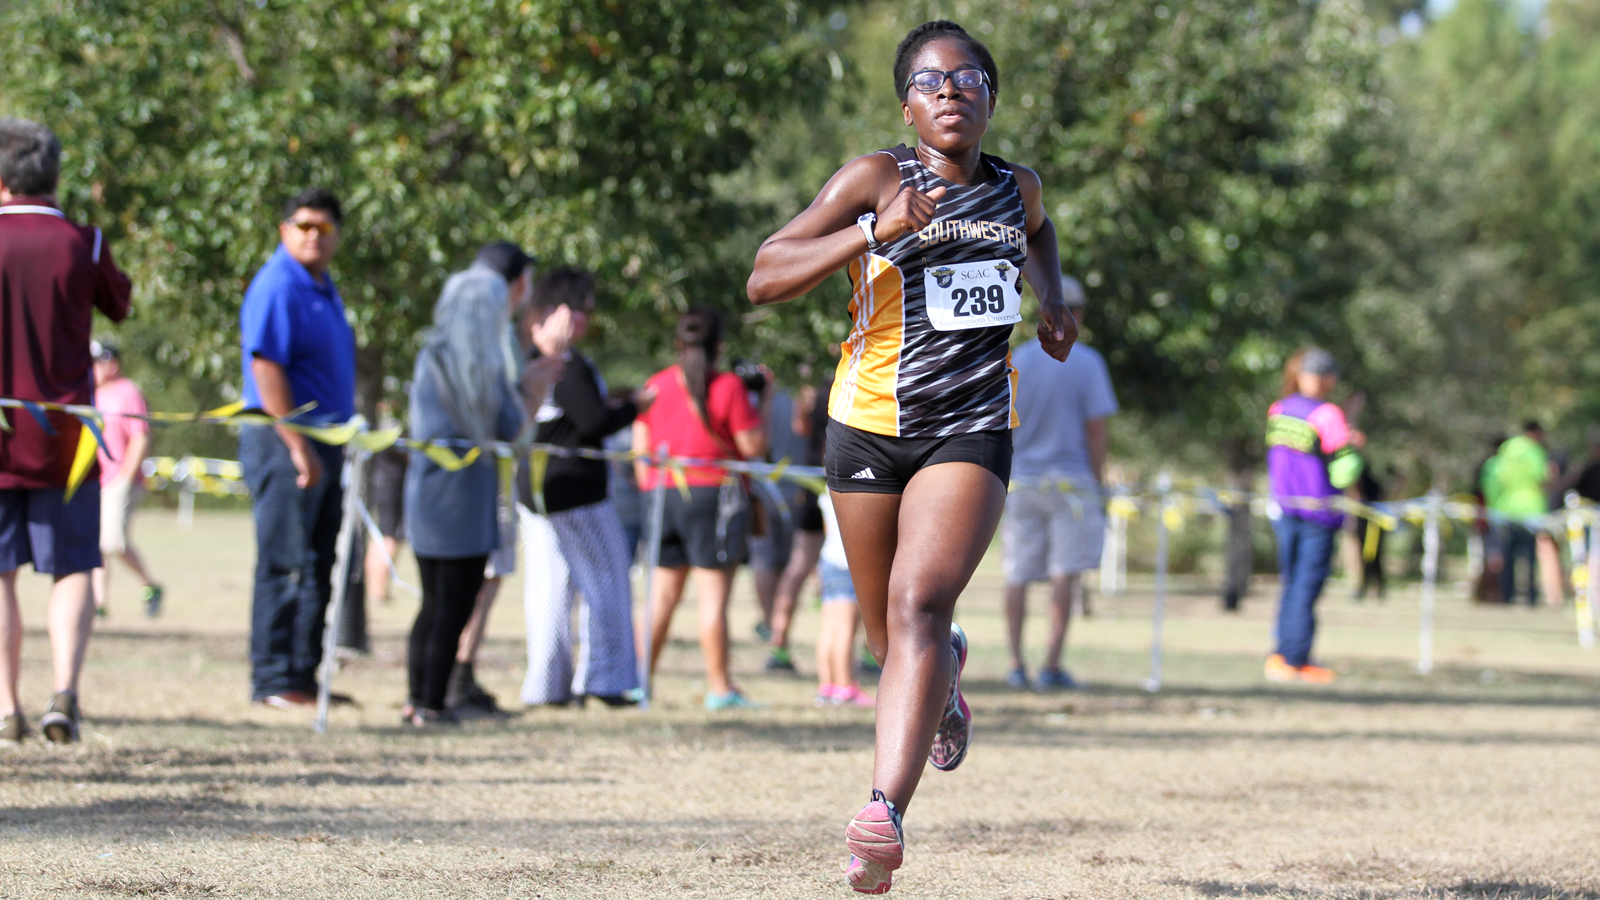 Pirates place sixth at SCAC Championships